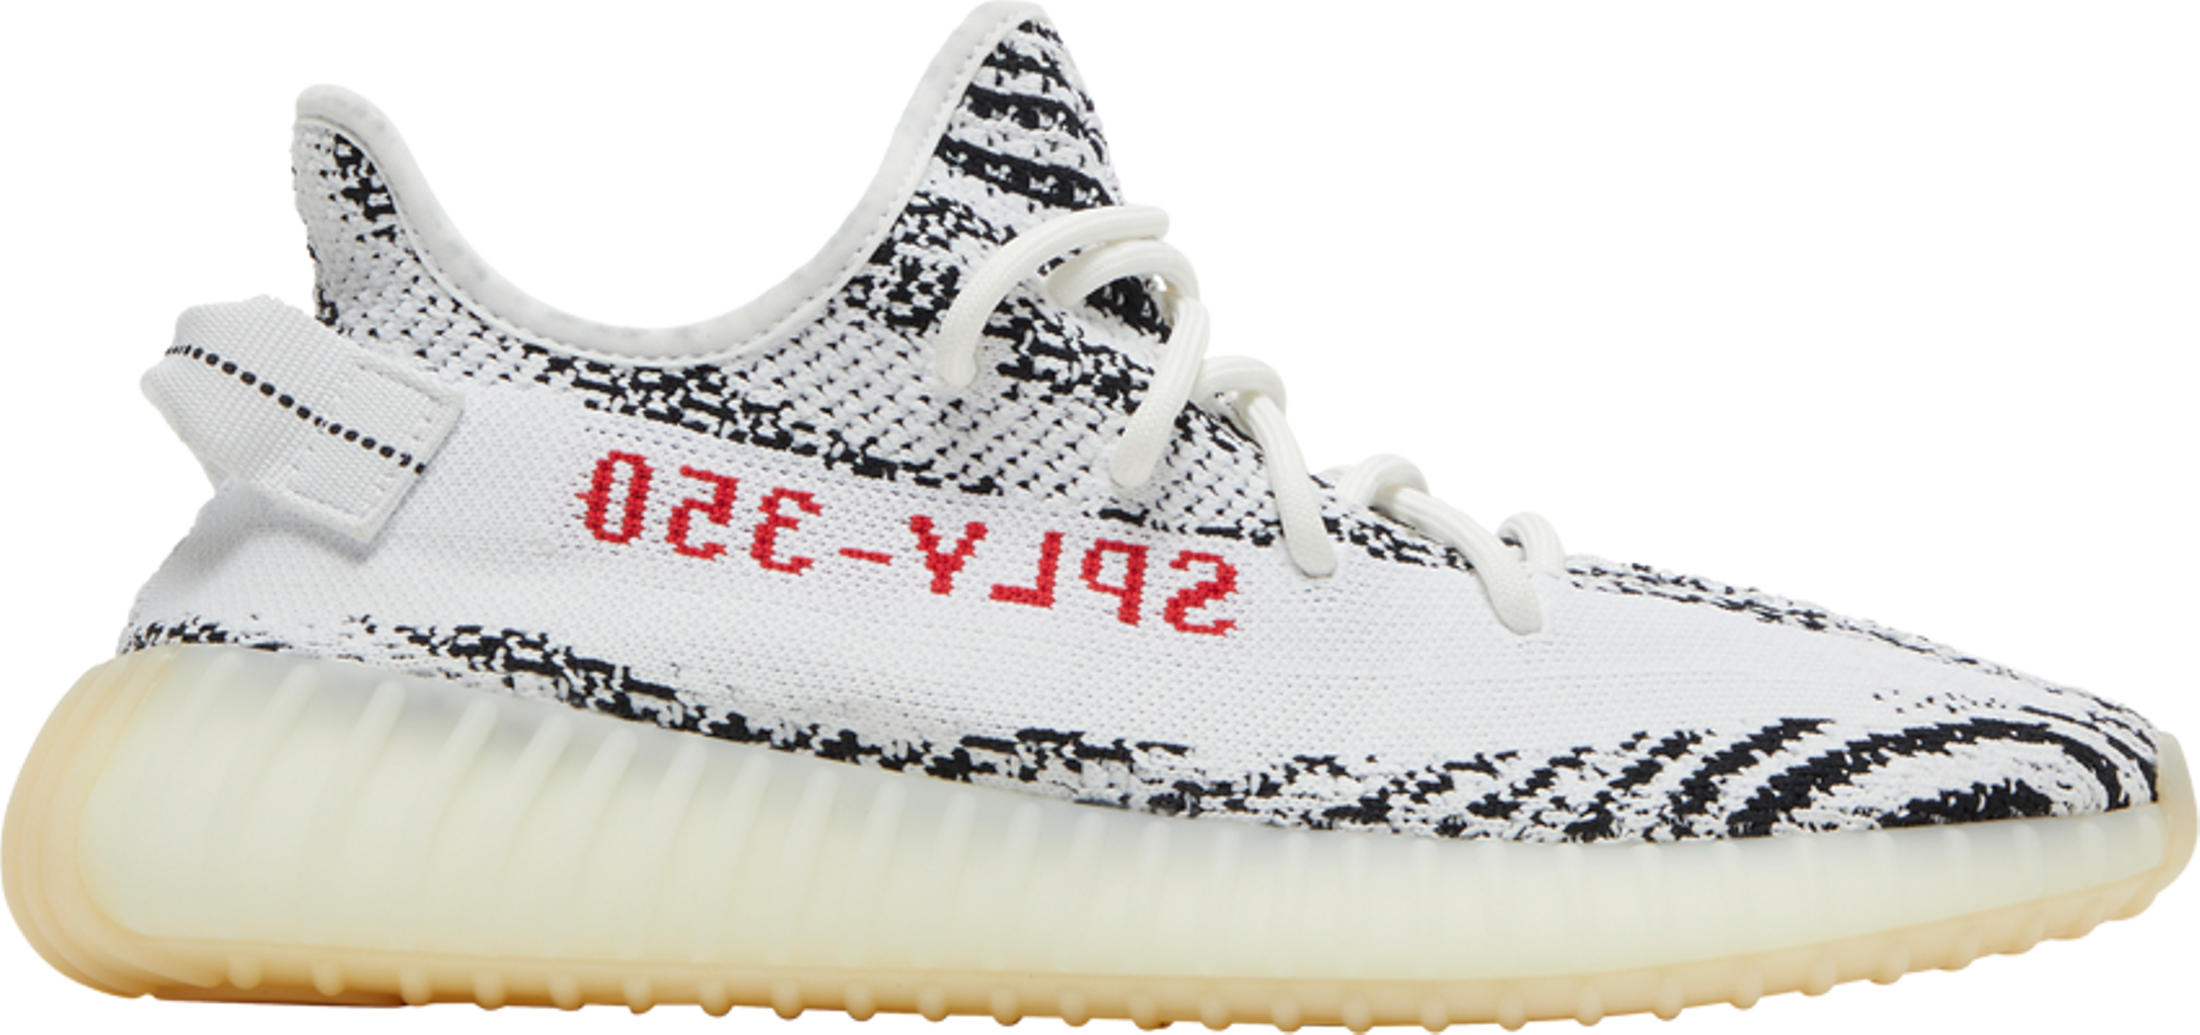 Yeezy Boost 350 V2 sneakers for sale at